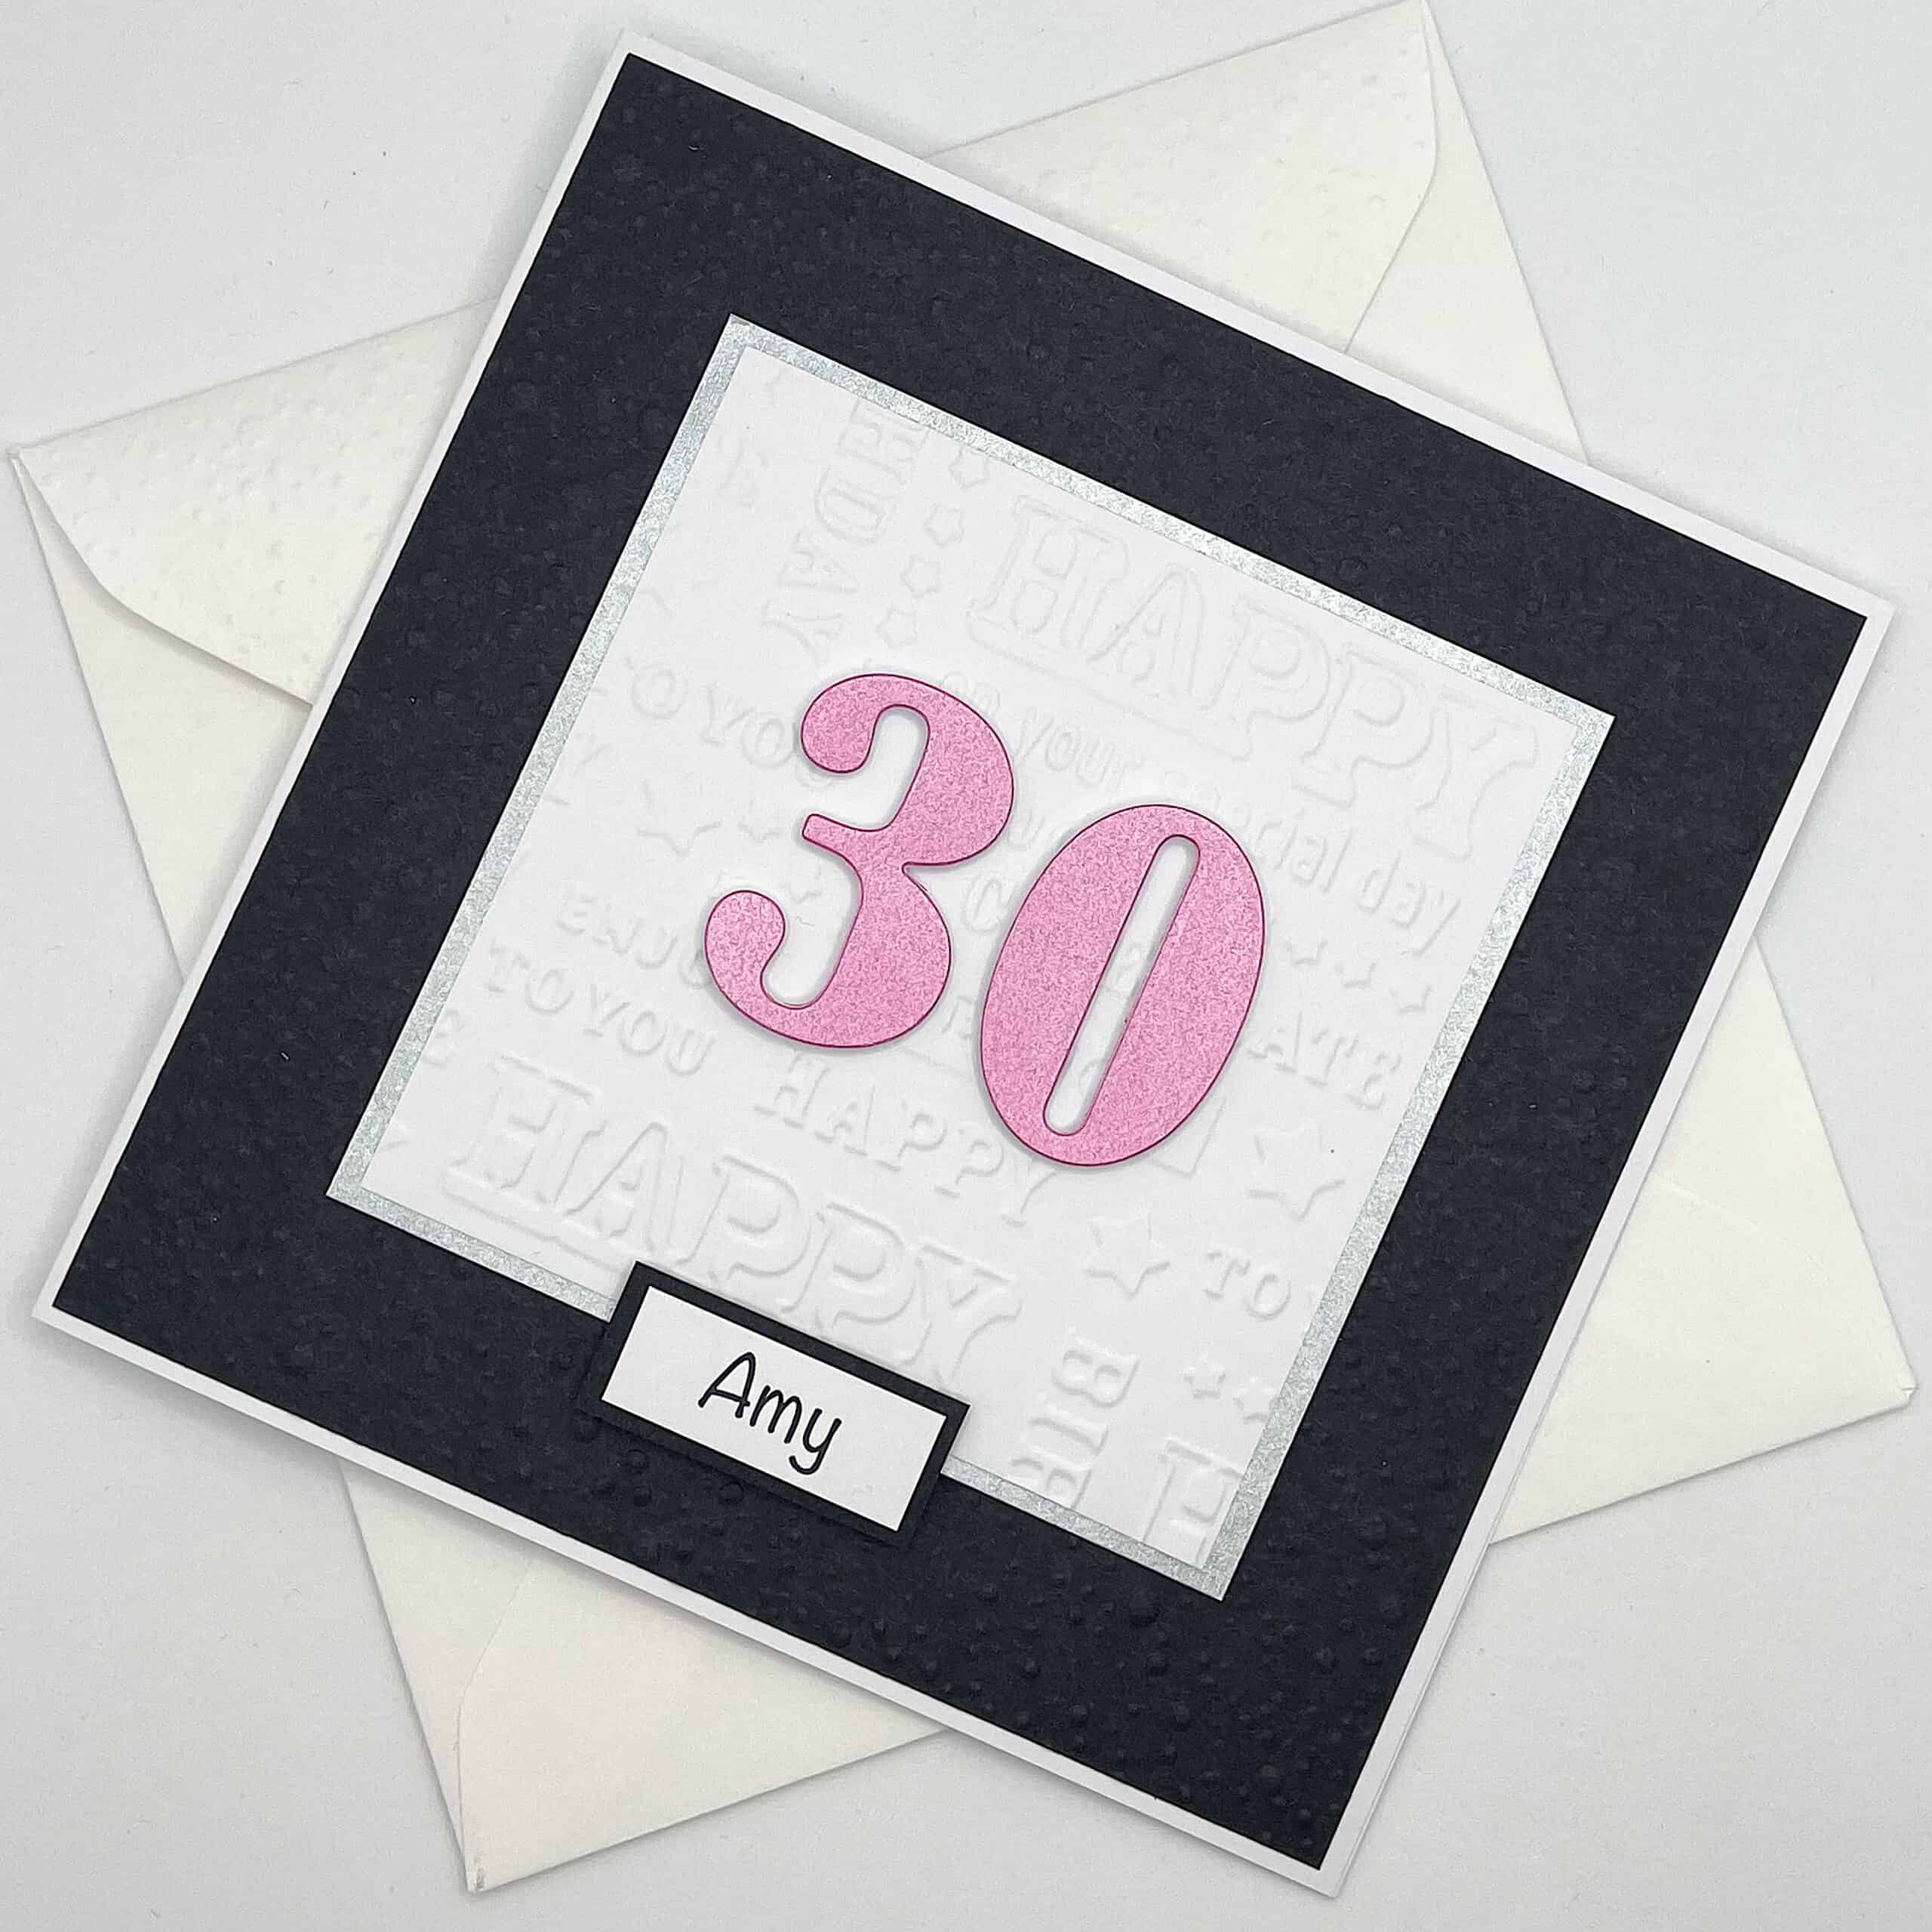 Personalised 30th Birthday Card - Handmade For Her, For Him by Looks Inviting with Free UK Delivery